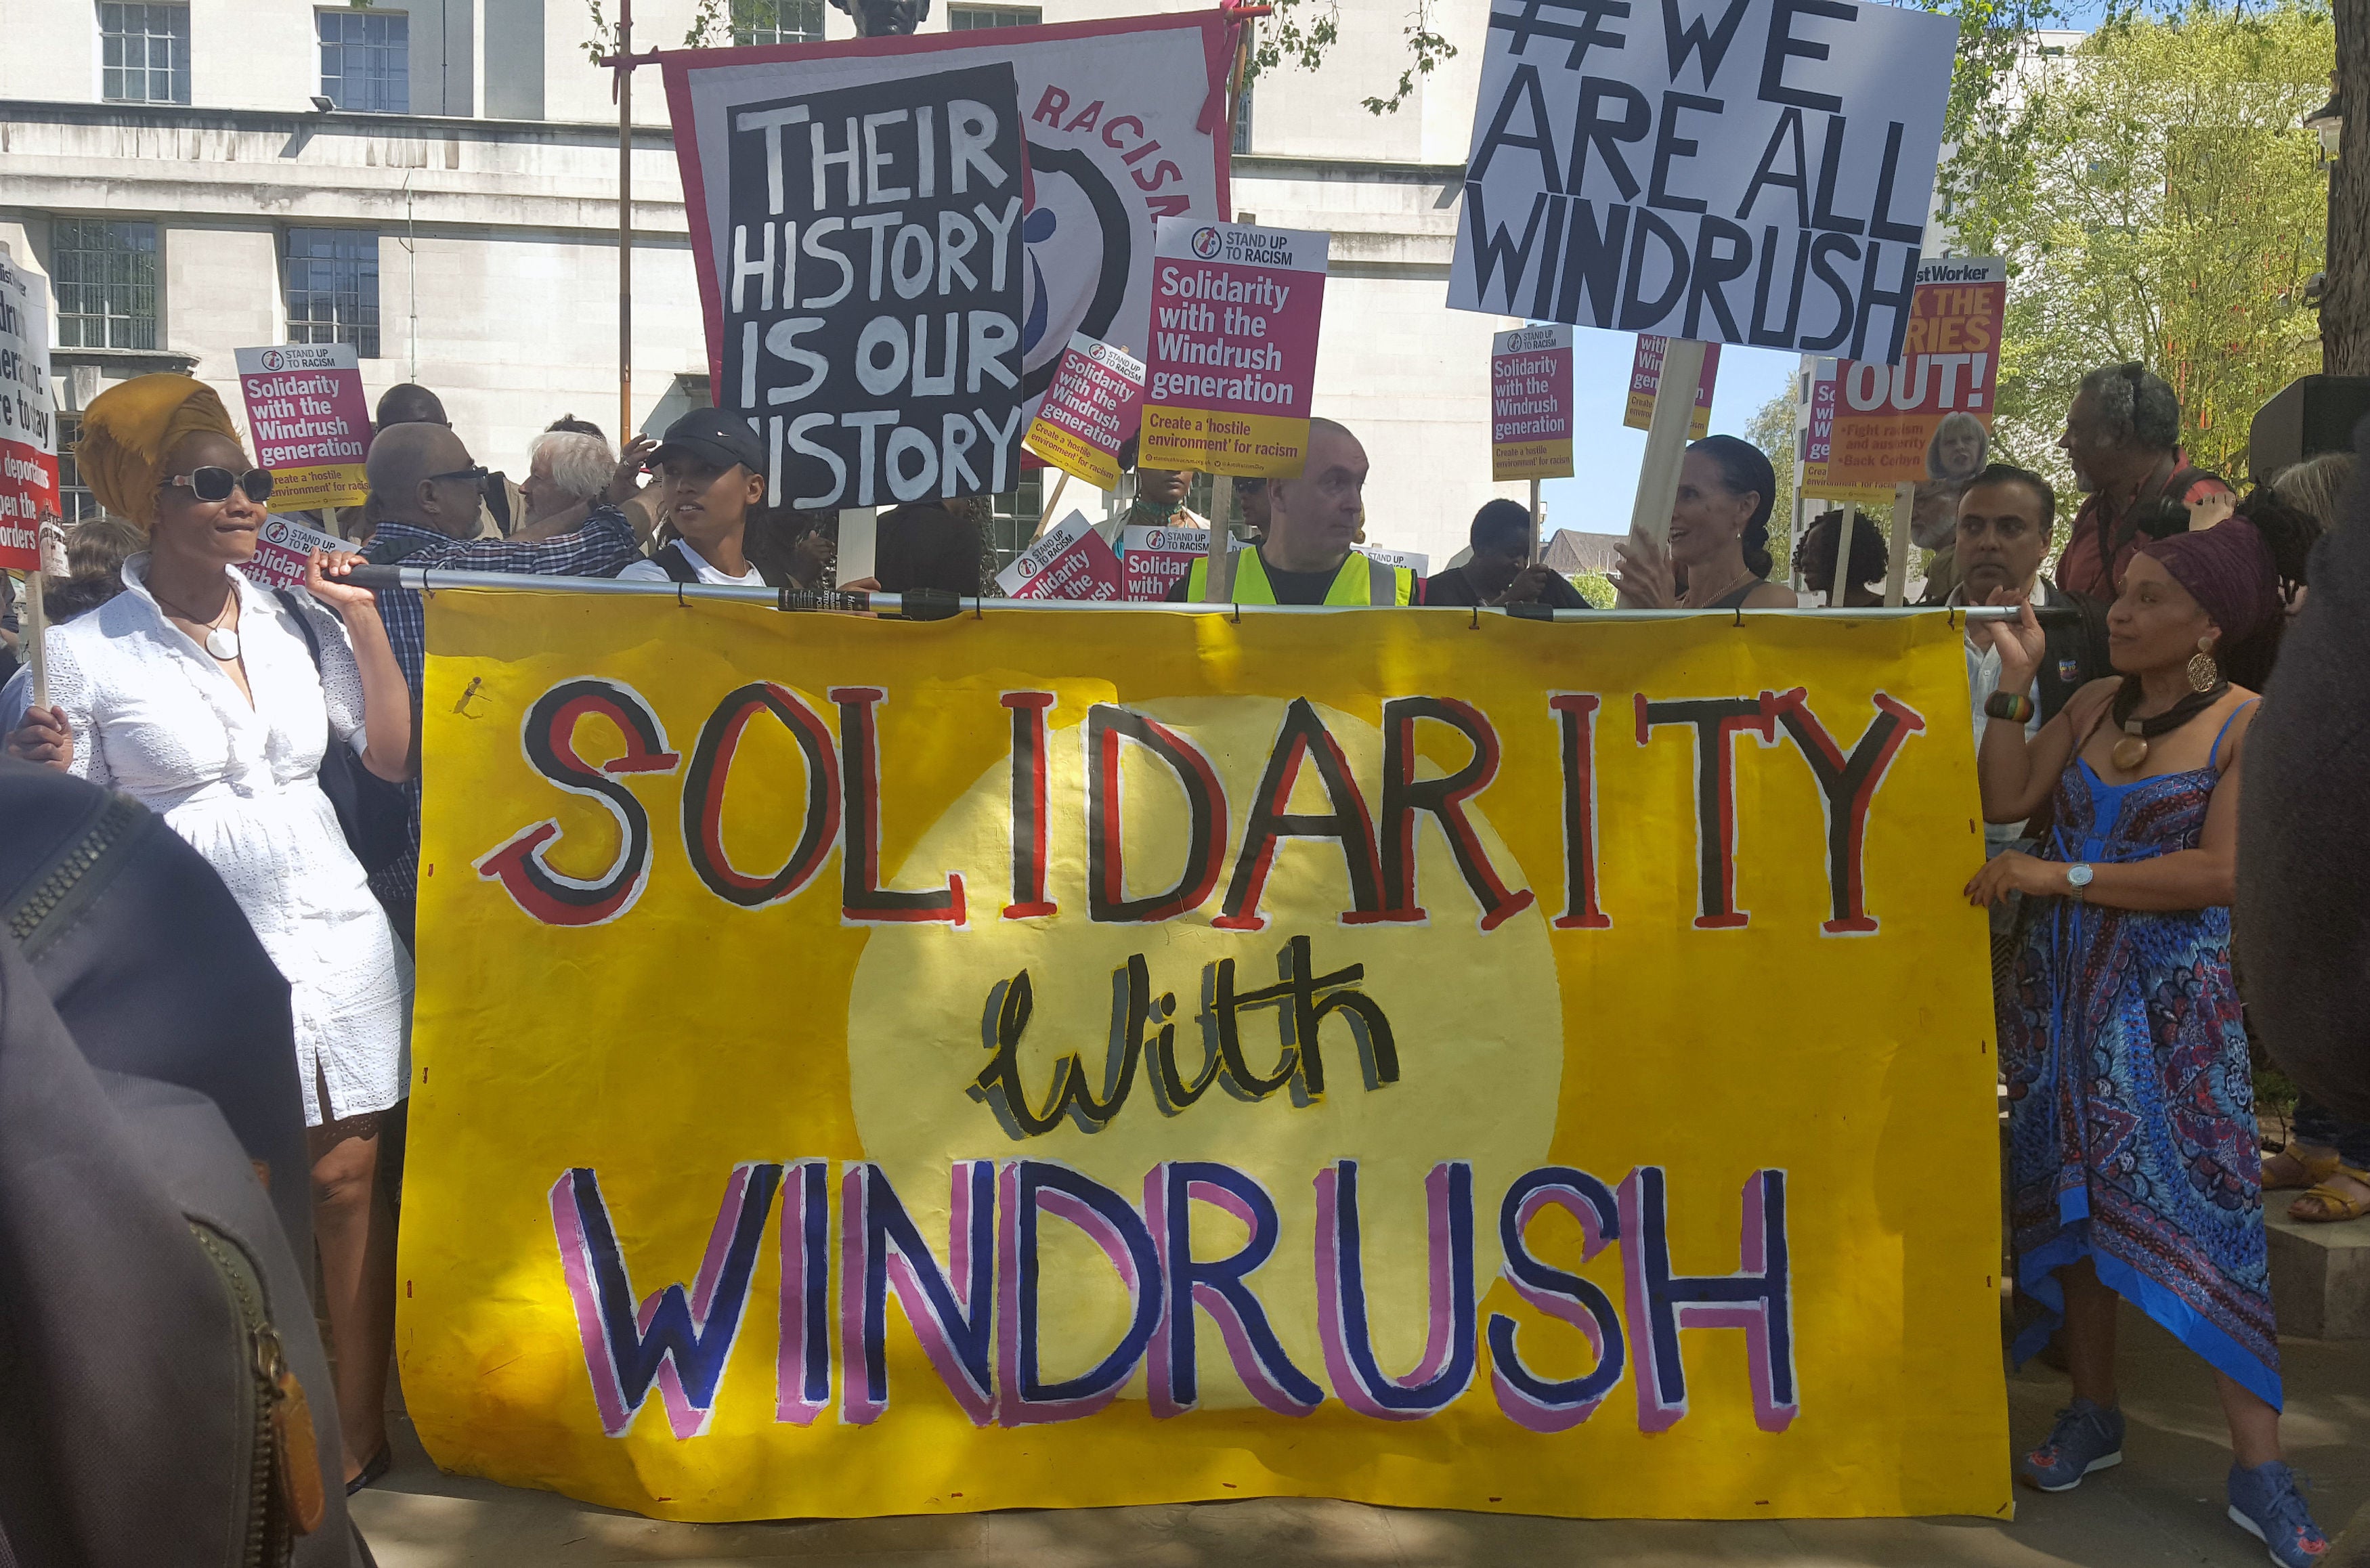 The Windrush scandal erupted in 2018 when British citizens, mostly from the Caribbean, were wrongly detained, deported or threatened with deportation (Catherine Wylie/PA)